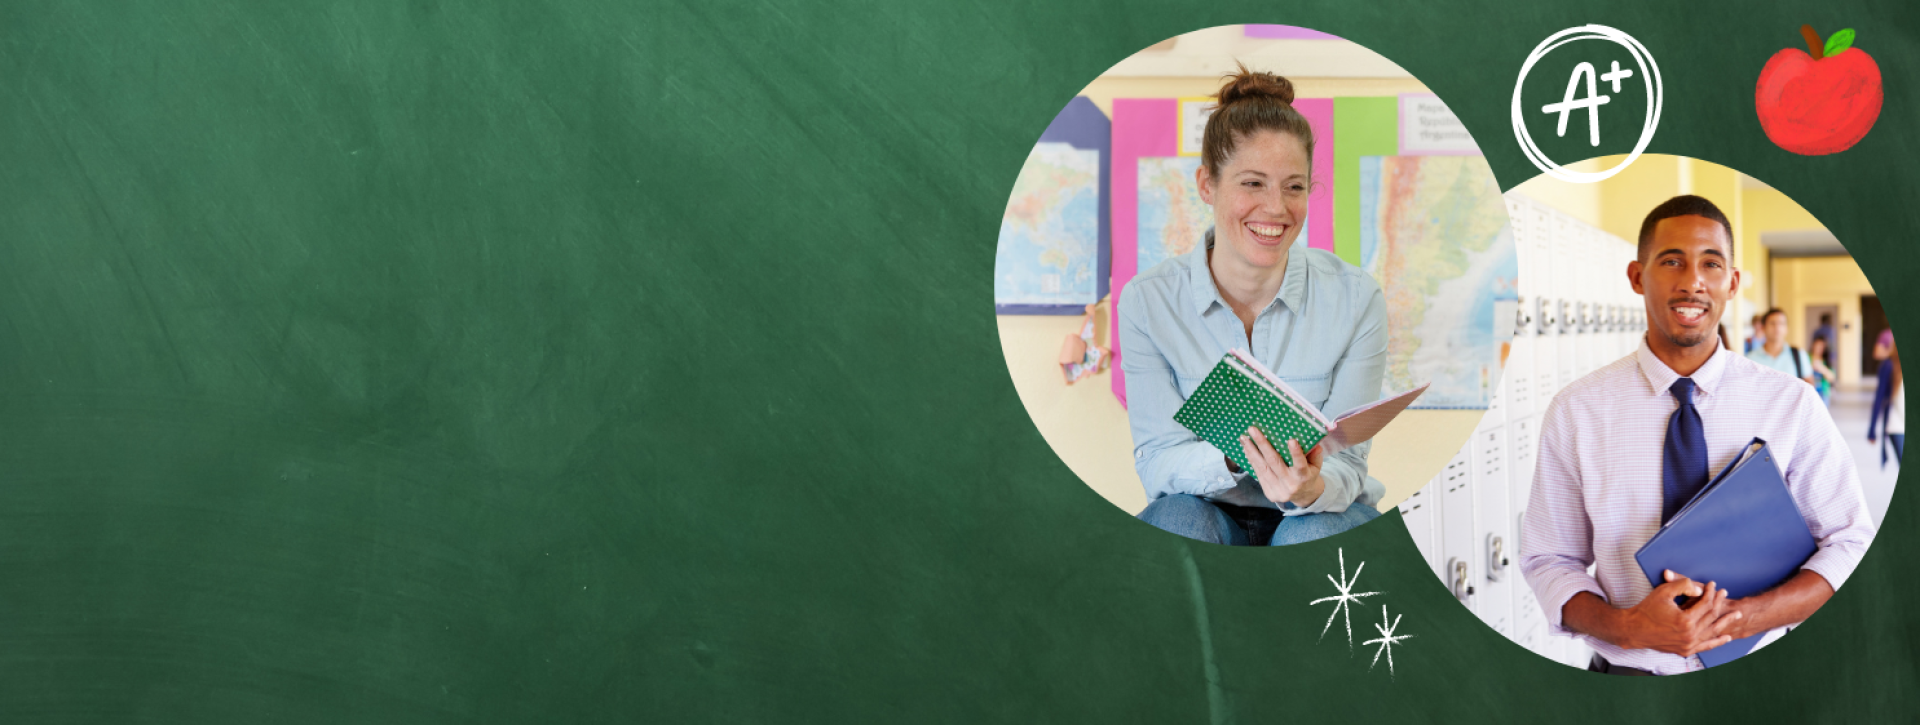 Green chalkboard with two pictures of teachers and chalkboard illustrations